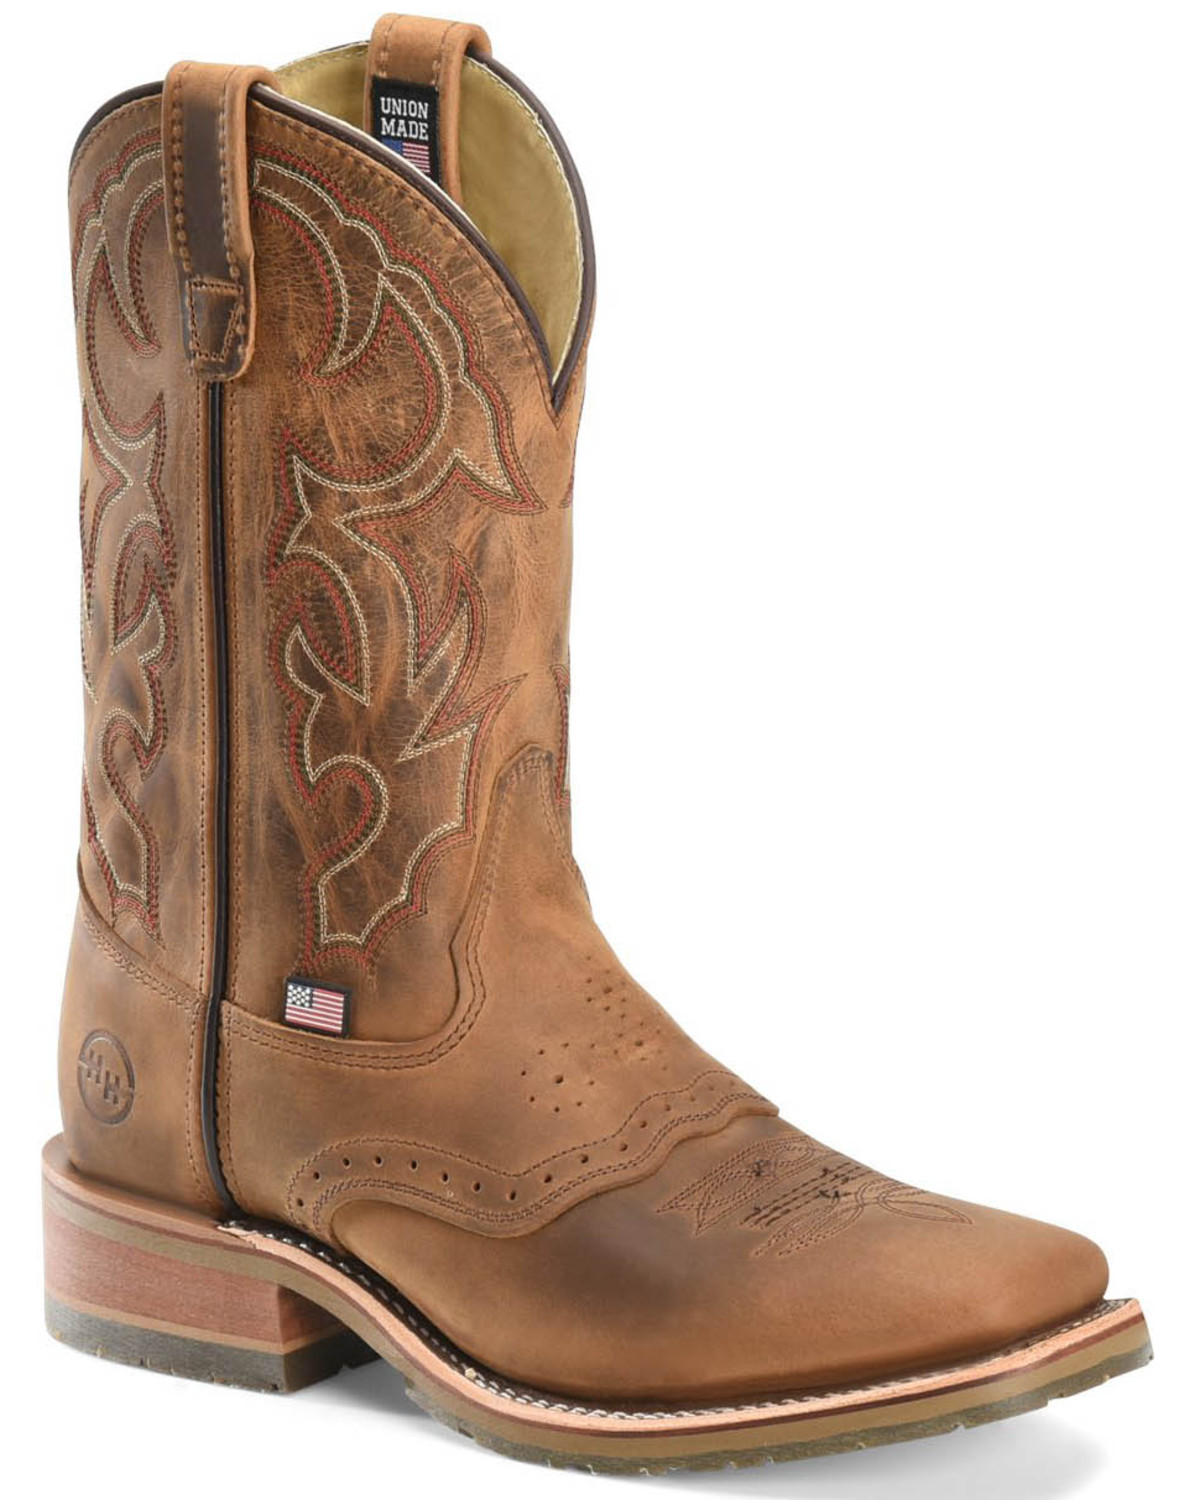 American Cowboy Boots: Made in the USA